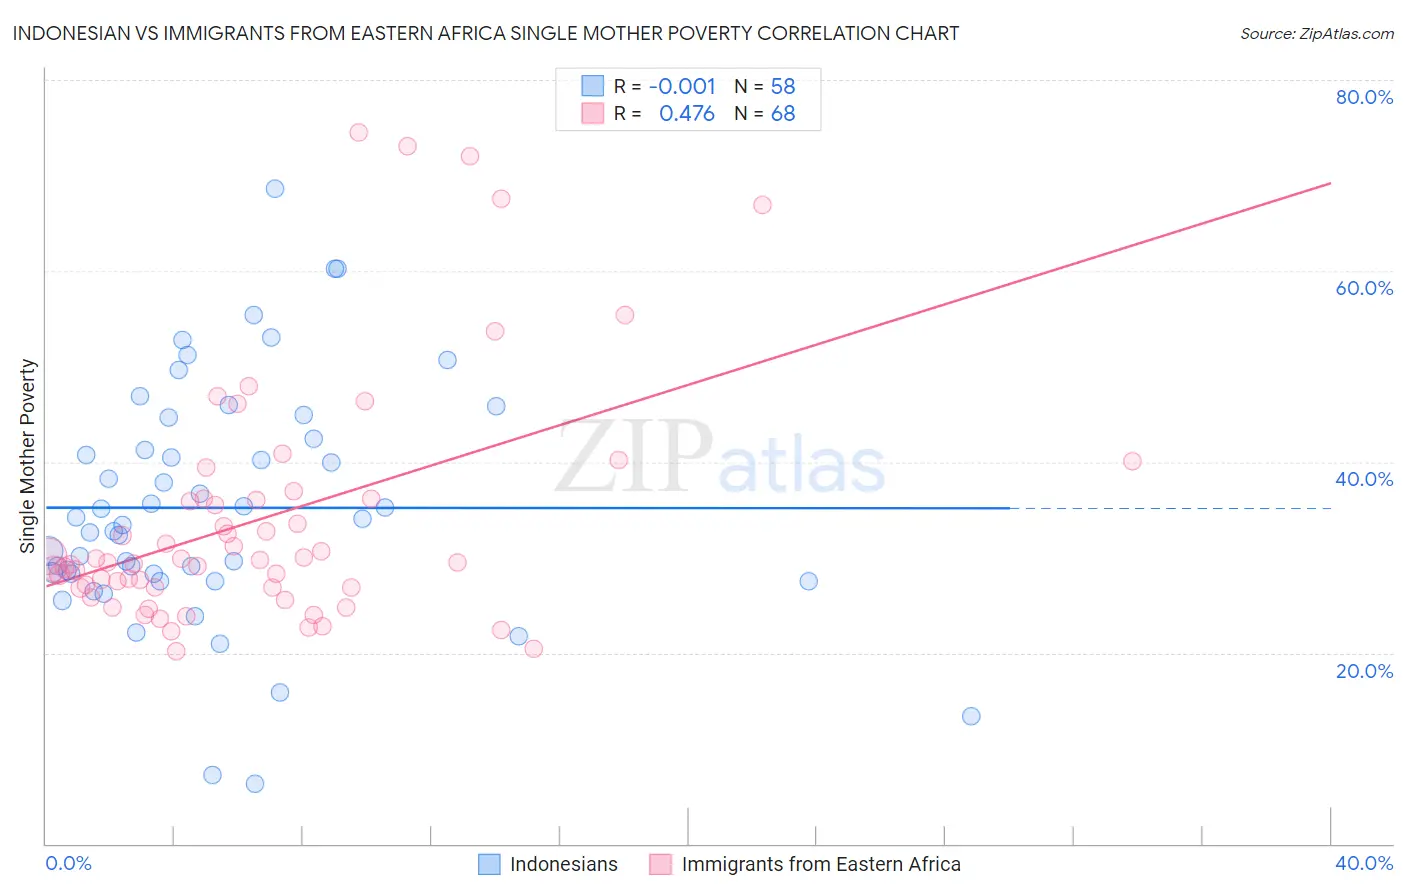 Indonesian vs Immigrants from Eastern Africa Single Mother Poverty